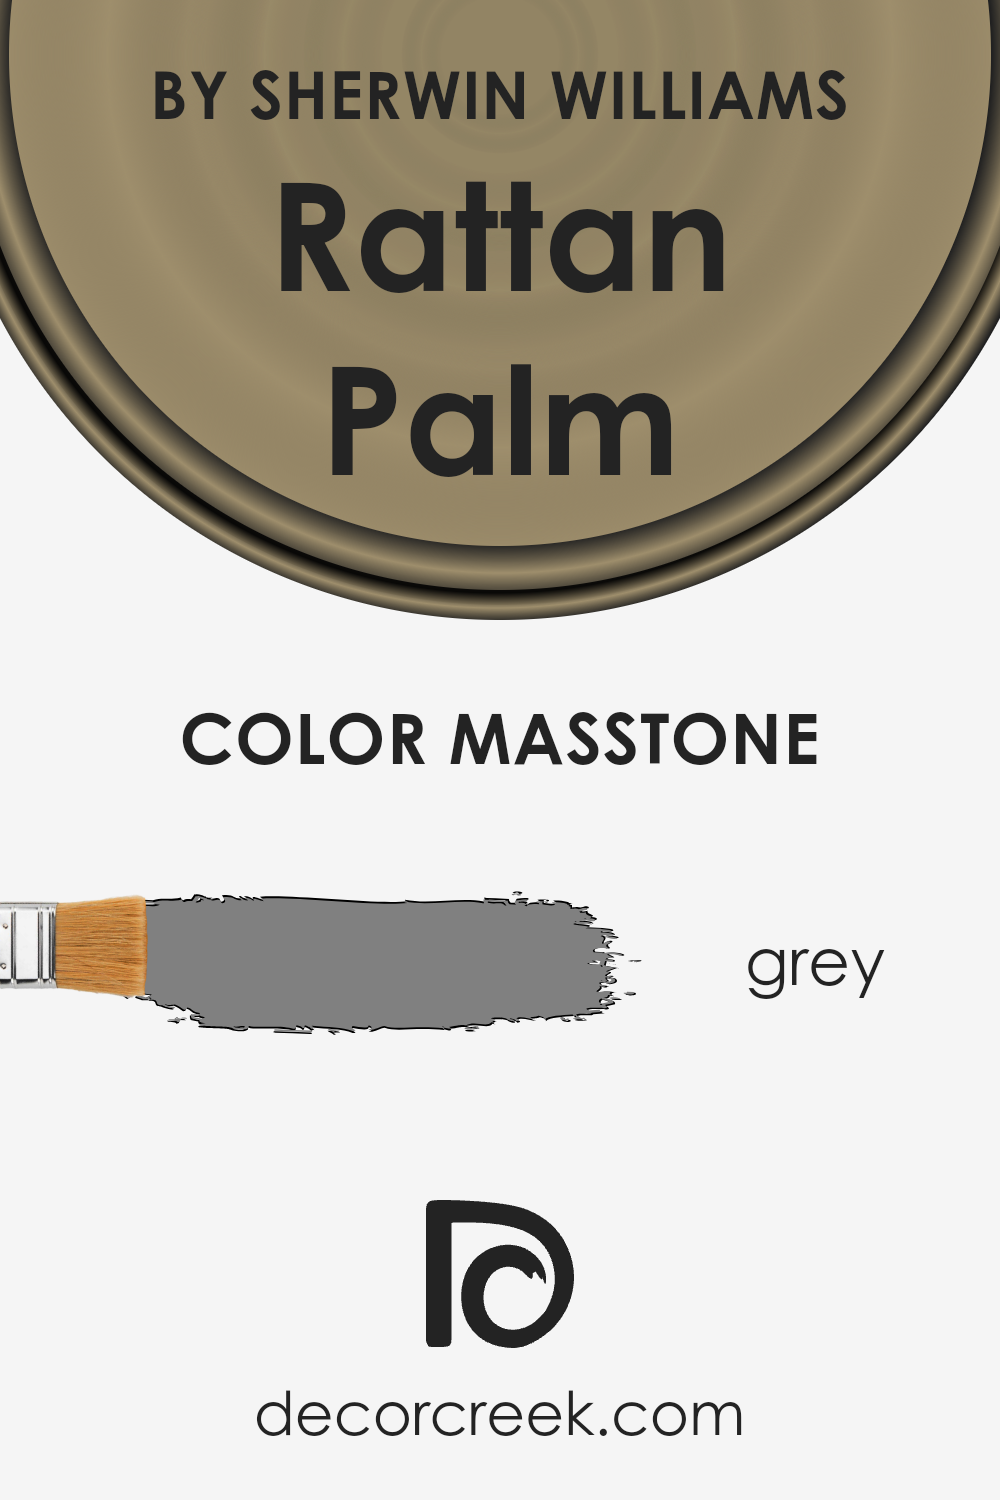 what_is_the_masstone_of_rattan_palm_sw_9533